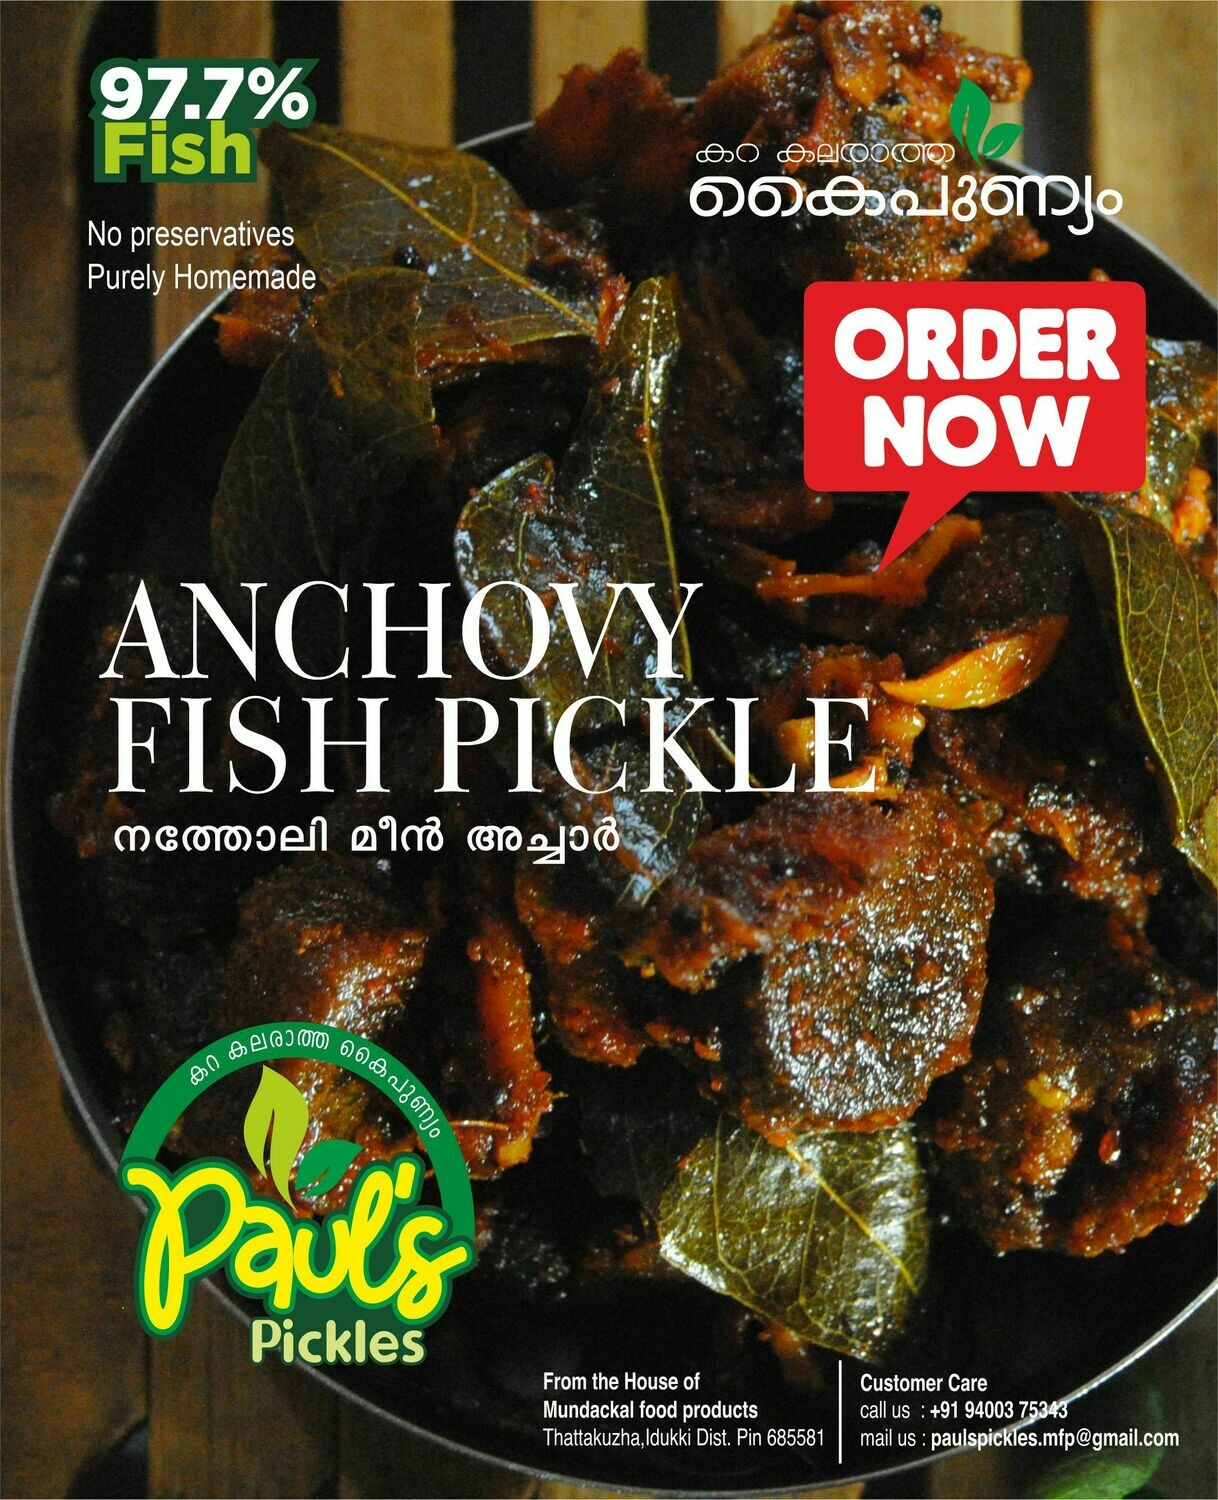 Anchovy Fish Pickles 97.7% fish 500g MRP ₹425 (₹50 off) -
-purely homemade
-No added colour
-Buy any two items or more to get a Free Delivery